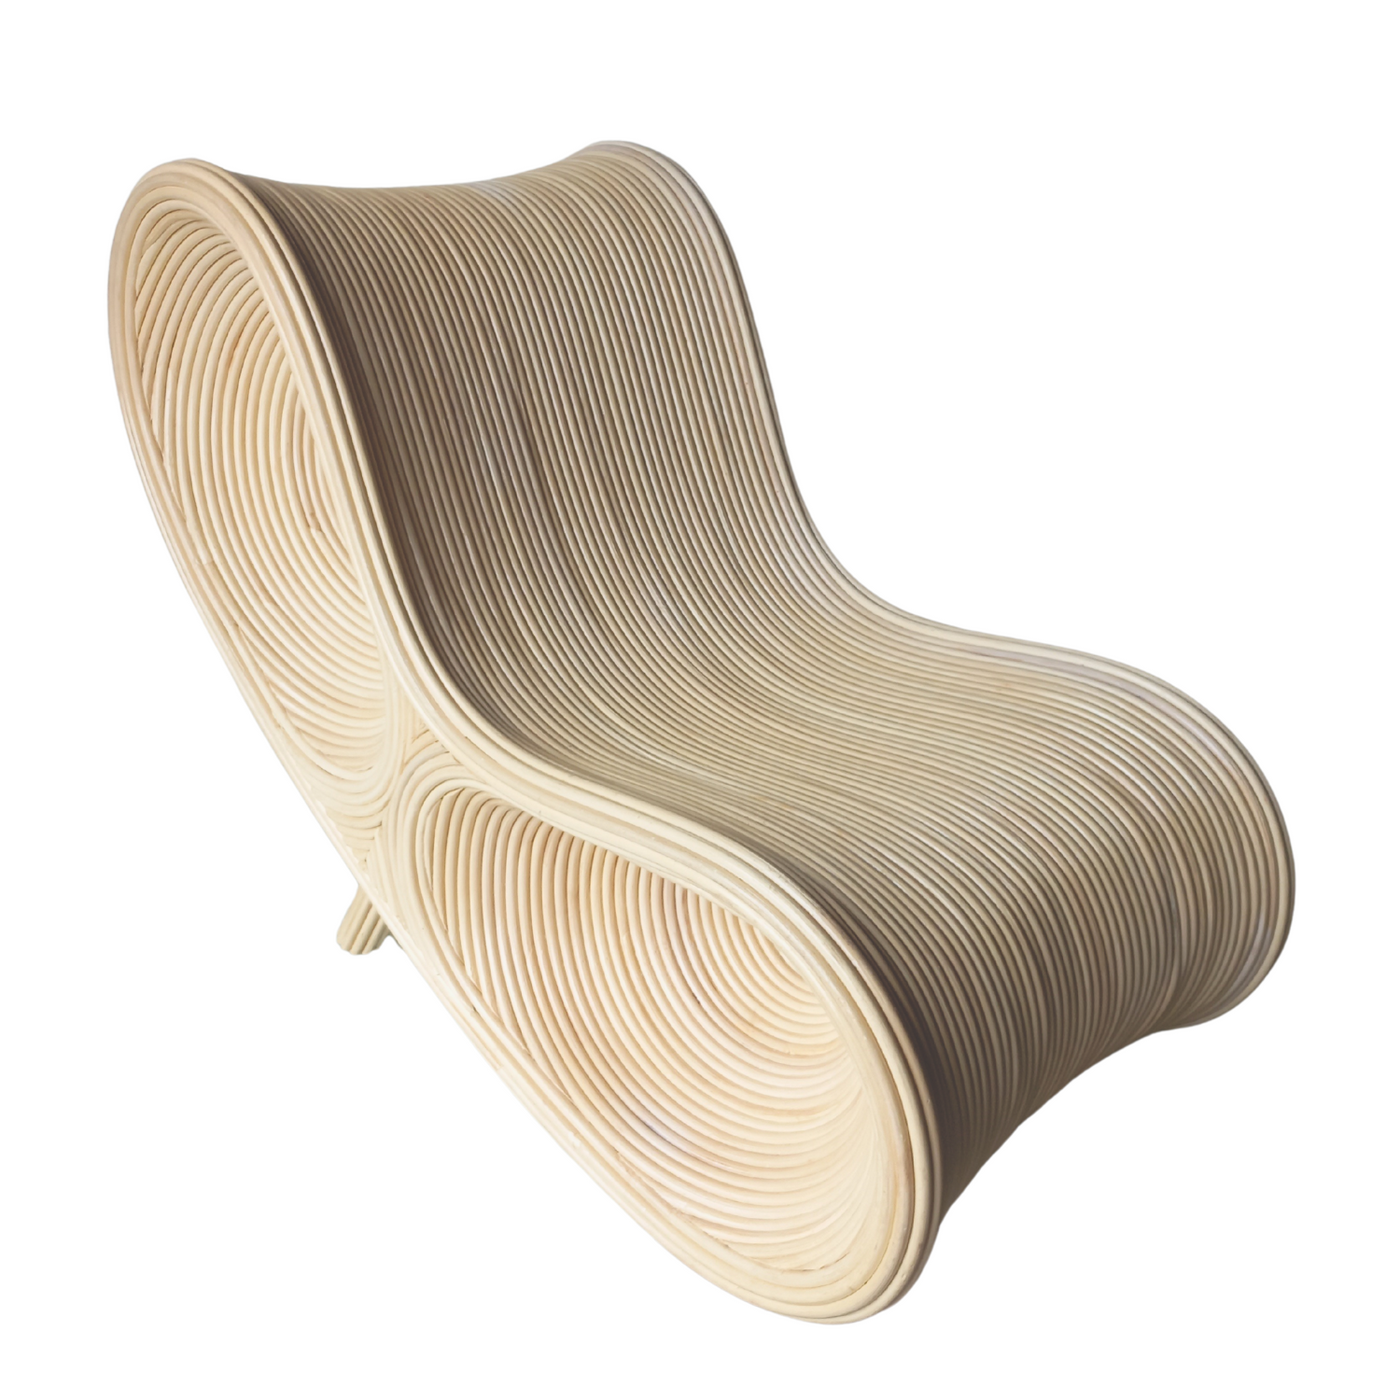 Bali Luxe Occasional Chair